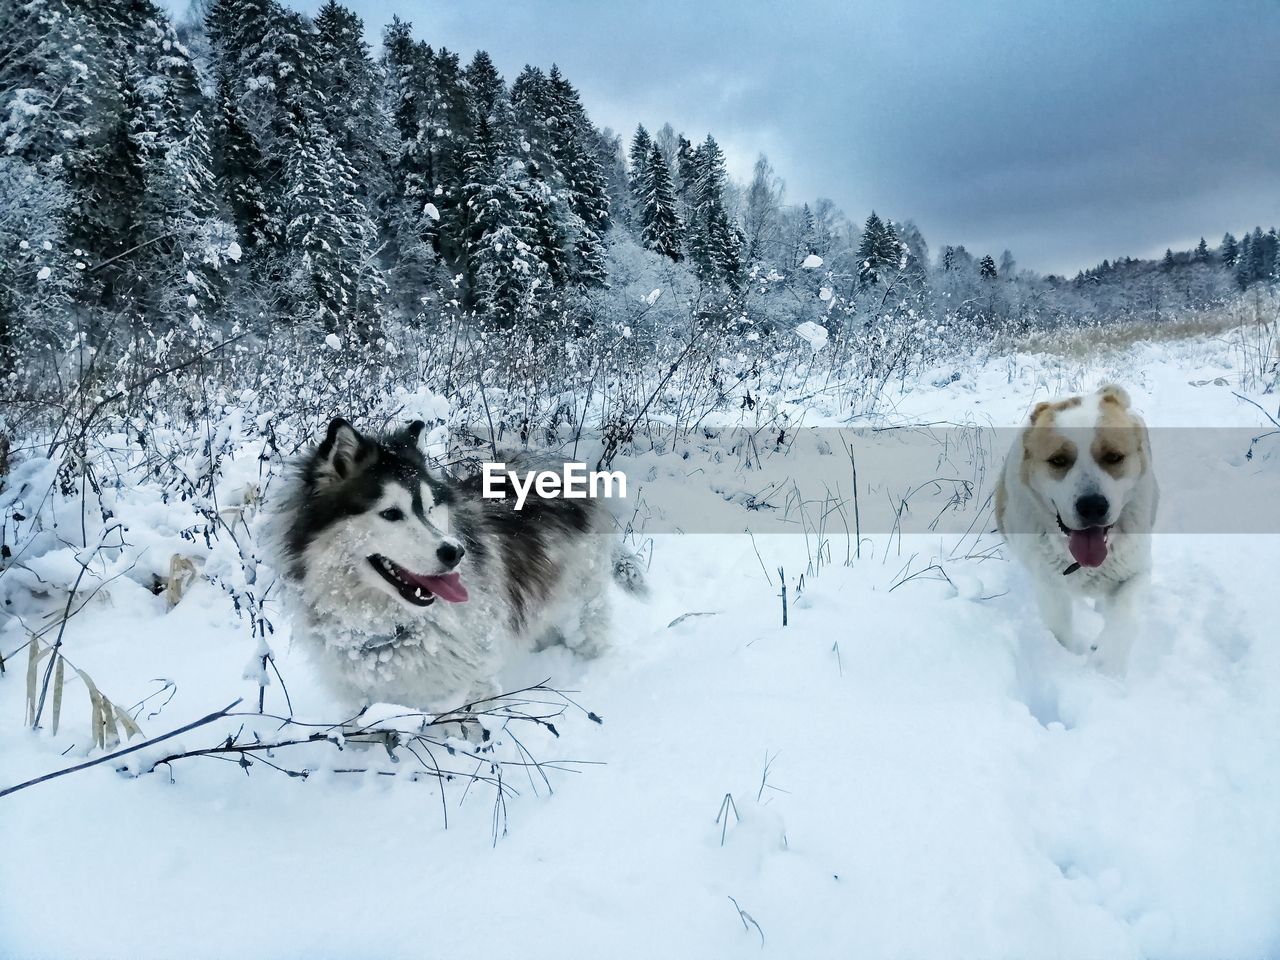 Dogs in snow